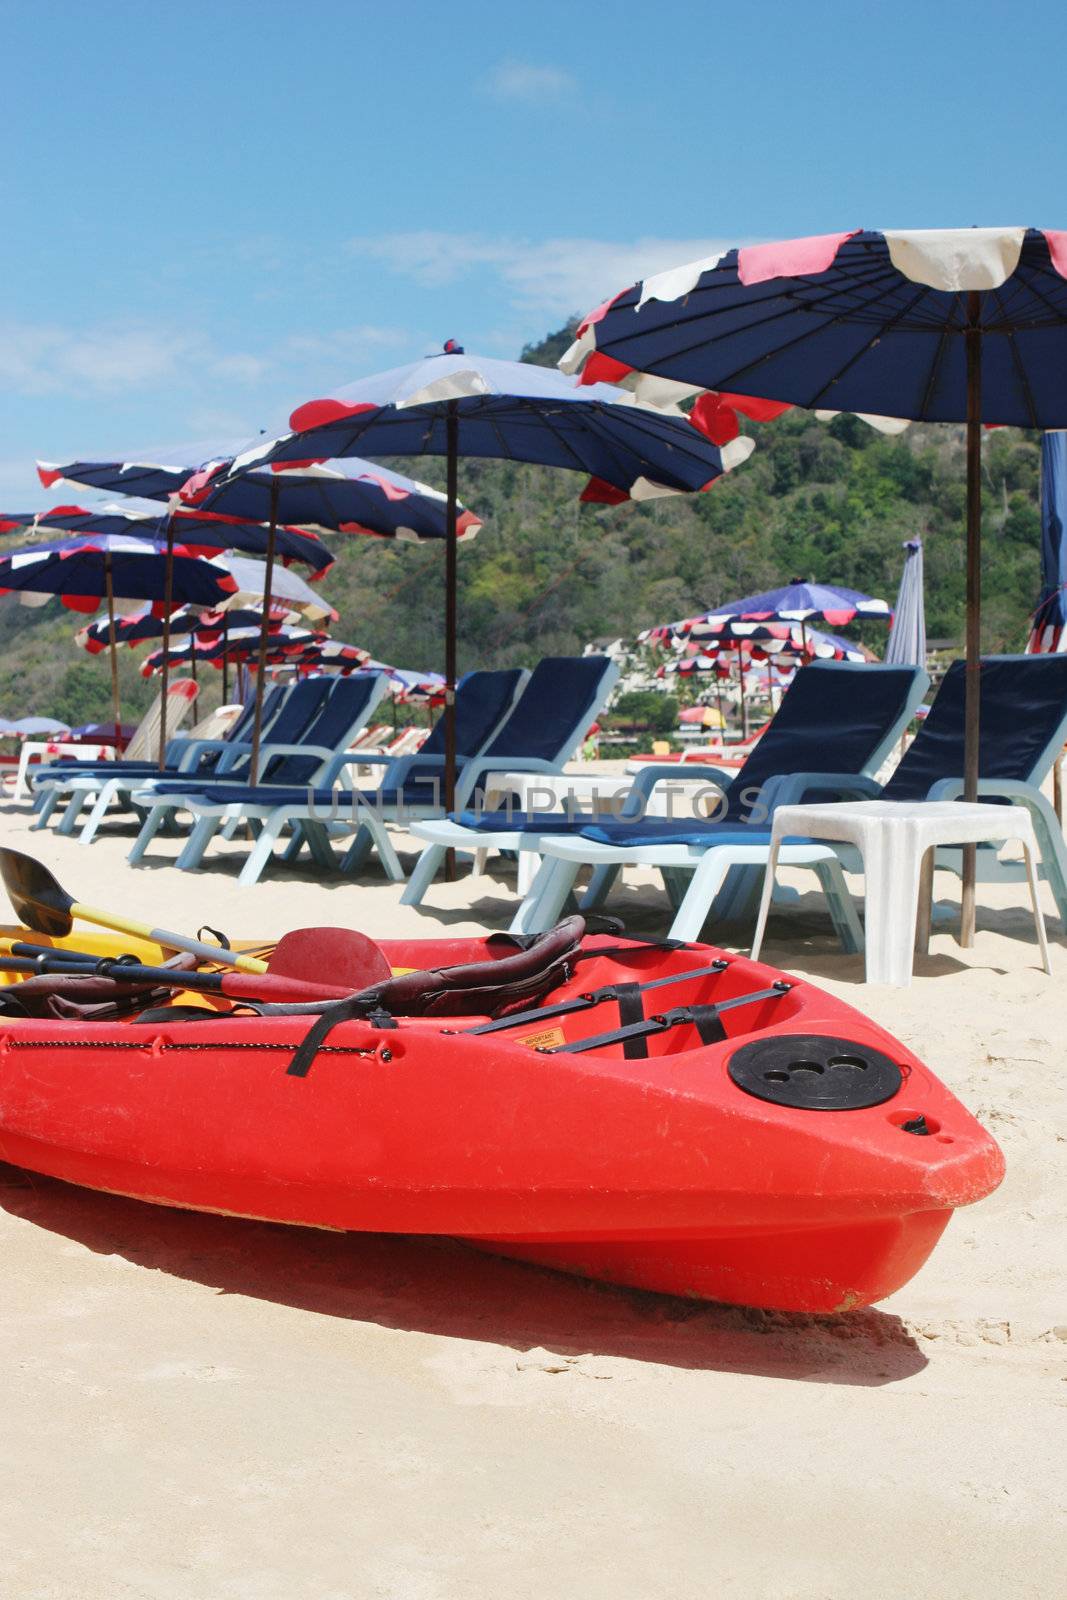 Red sea kayak on the beach surrounded by beach umbrellas.